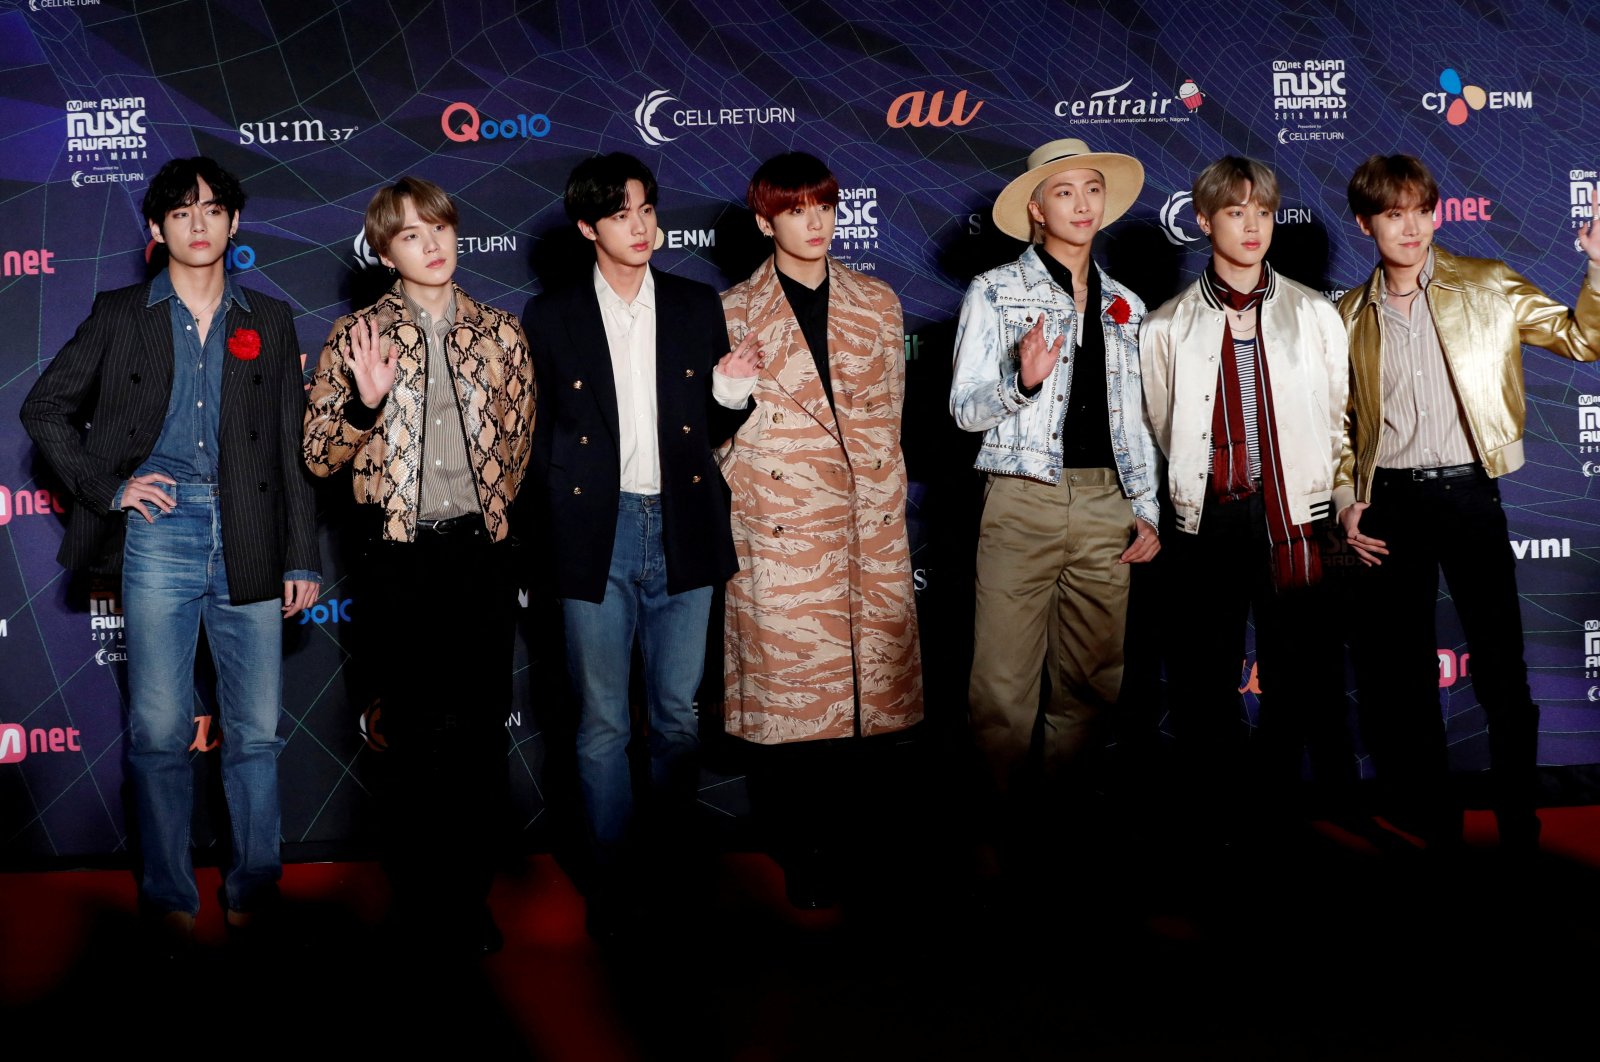 Members of South Korean boy band BTS pose on the red carpet during the annual MAMA Awards at Nagoya Dome in Nagoya, Japan, December 4, 2019. (REUTERS)